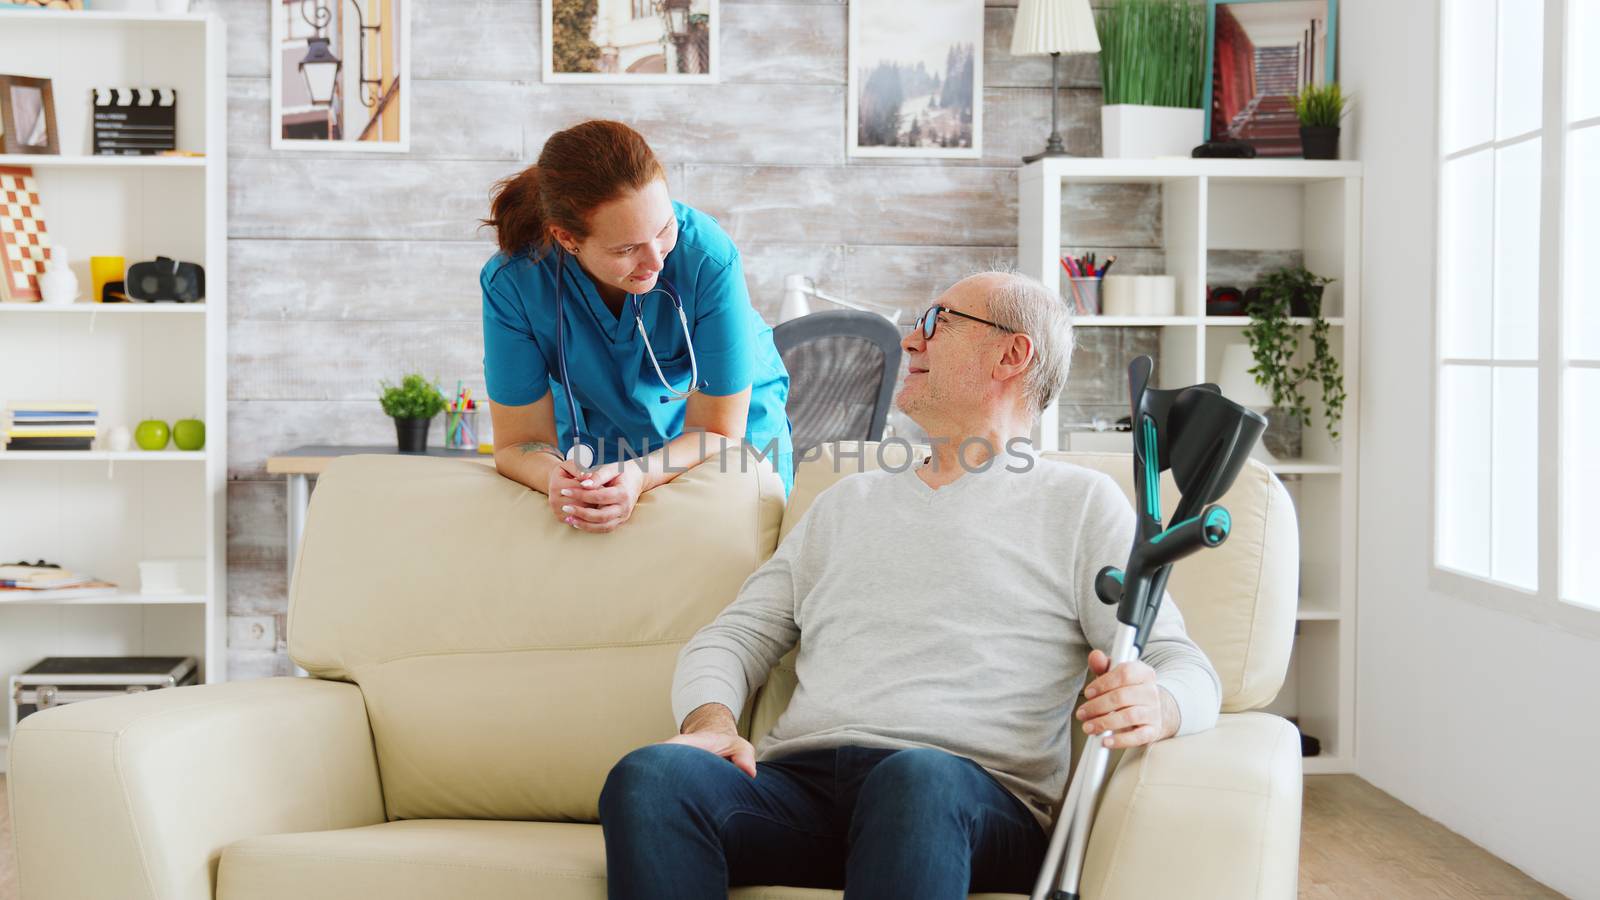 Retired man in nursing home talking with a nurse by DCStudio